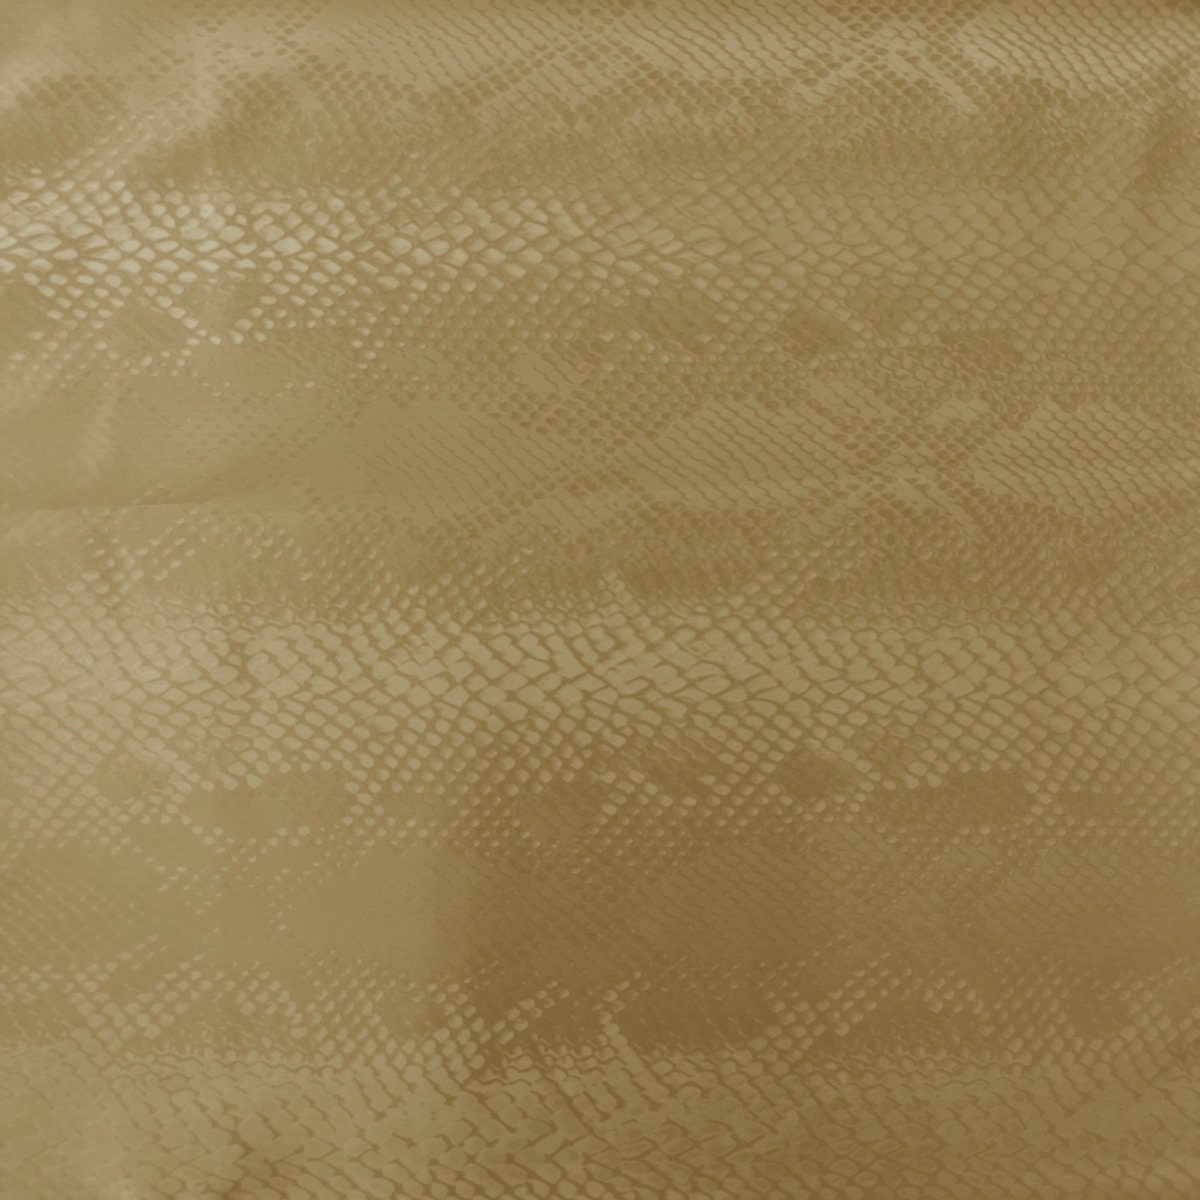 Beige Gatorich Faux Leather Upholstery Crafting Vinyl Fabric